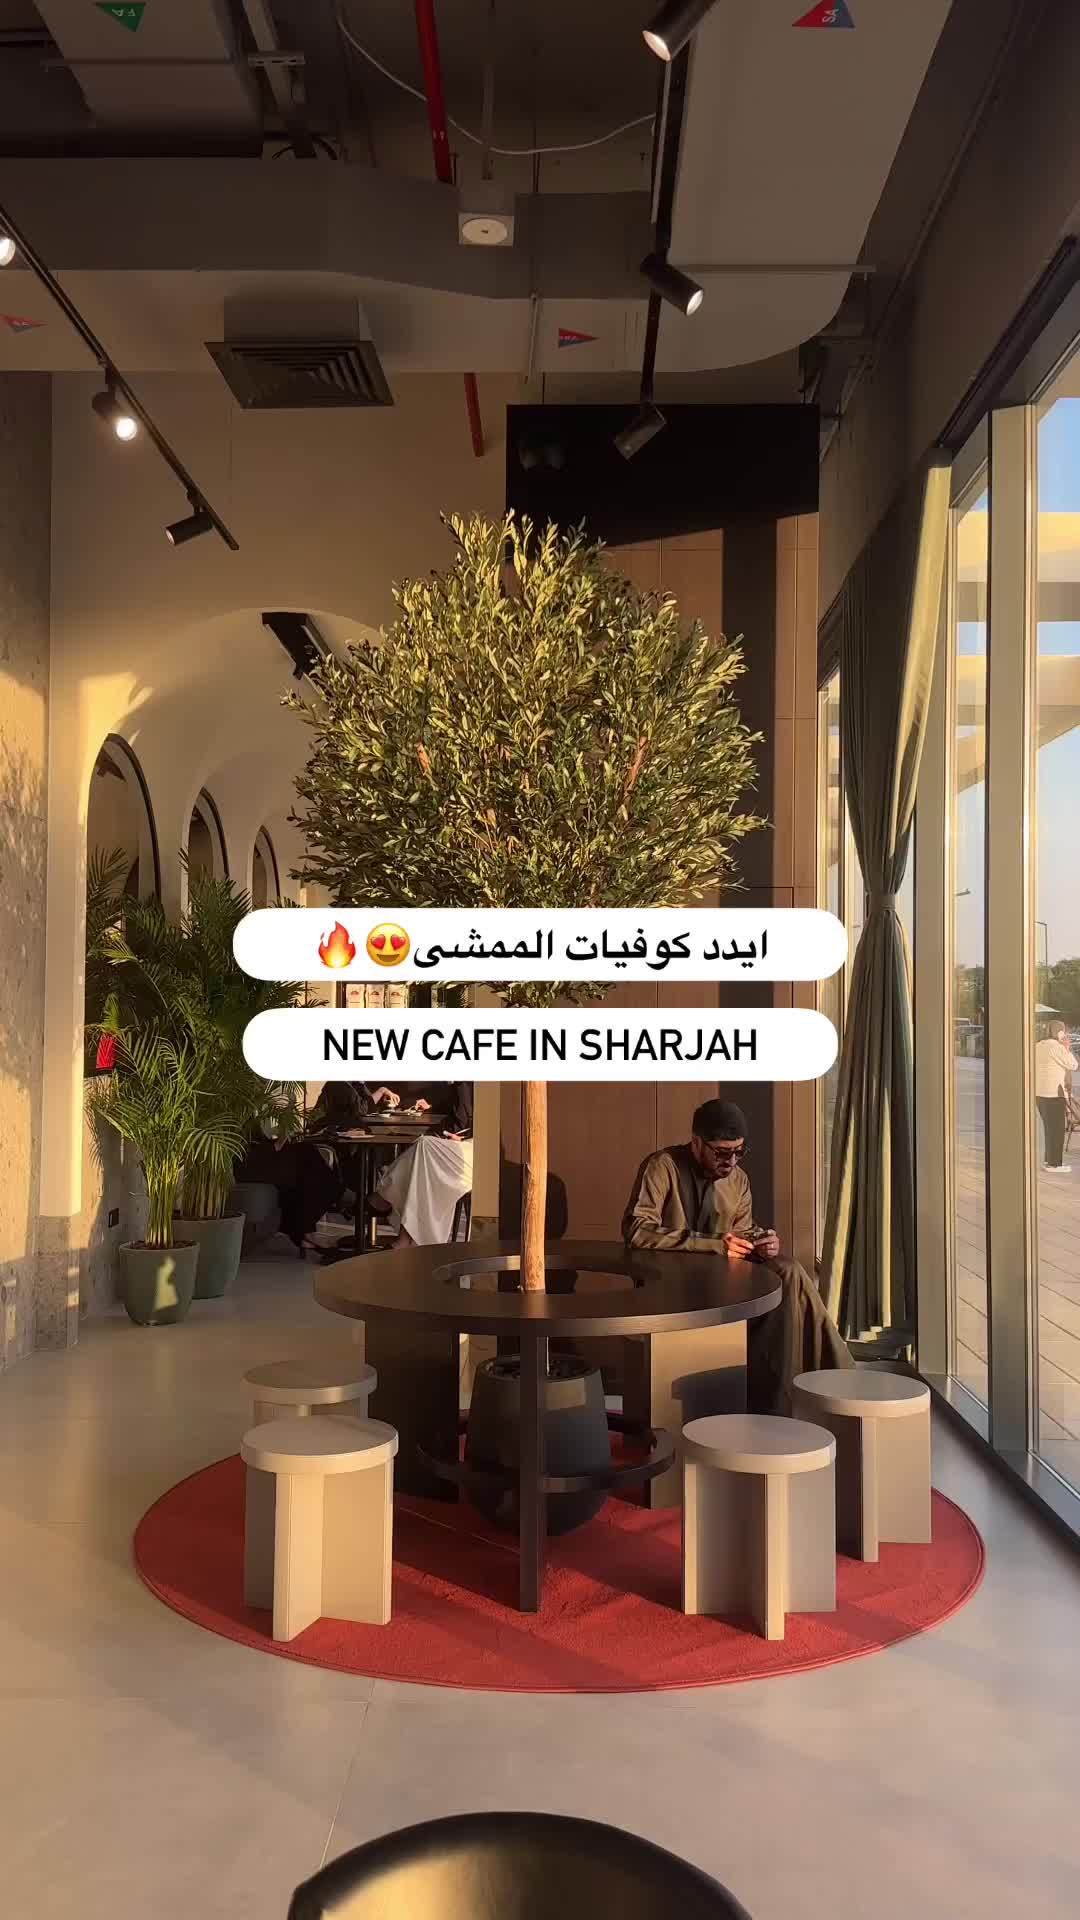 New Cafe in Al Mamsha, Sharjah - That's All